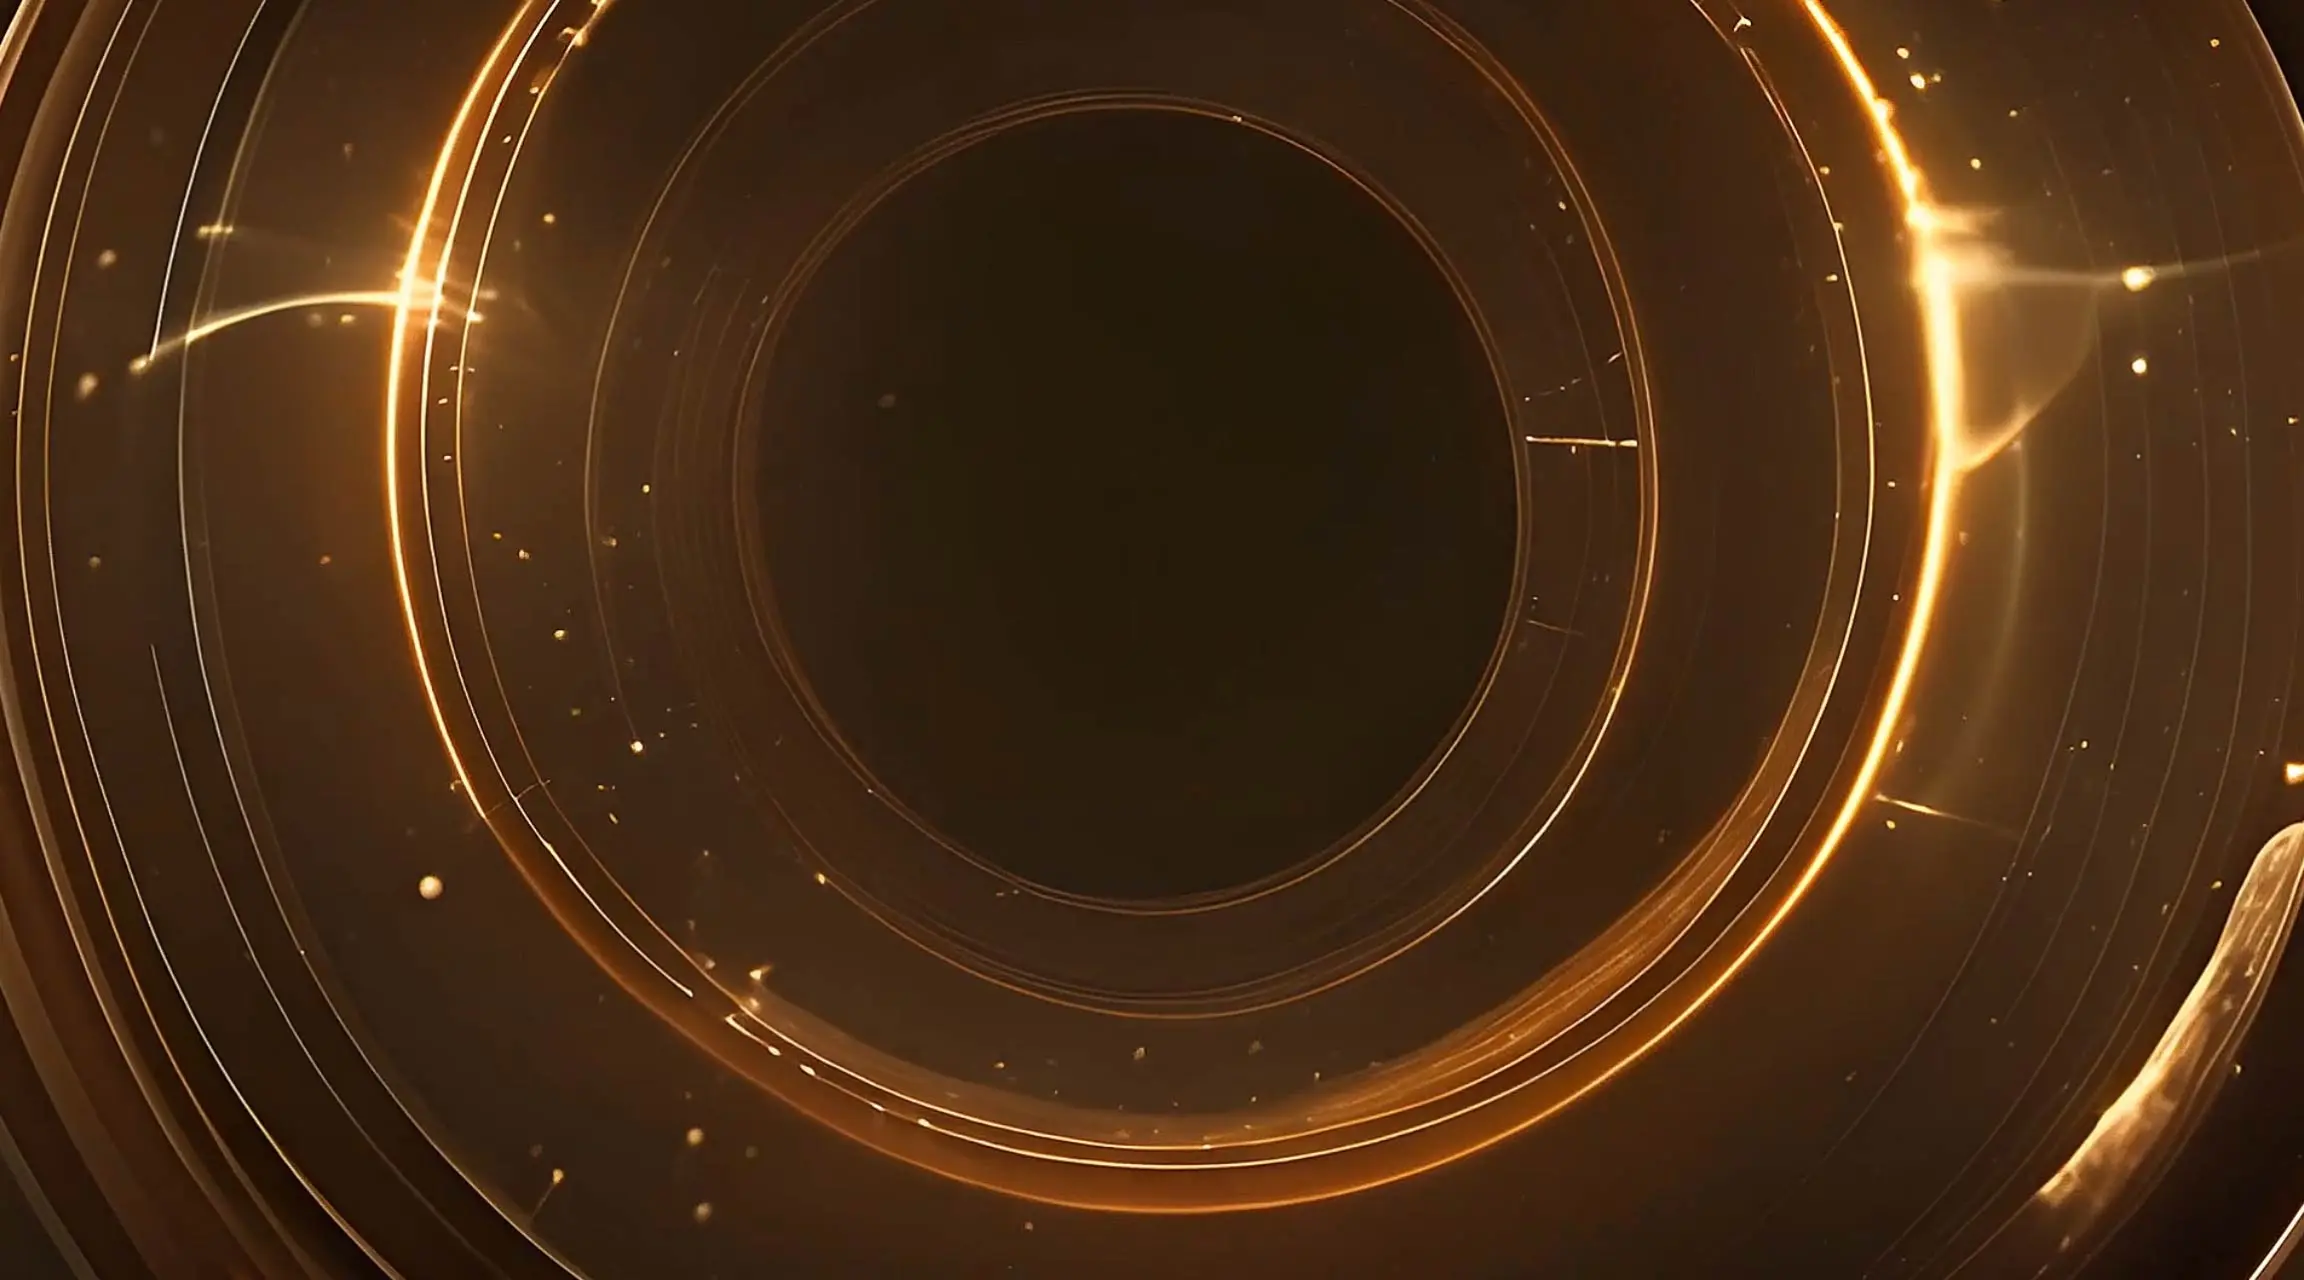 Luminous Rings and Sparks Sci-Fi Themed Motion Graphic